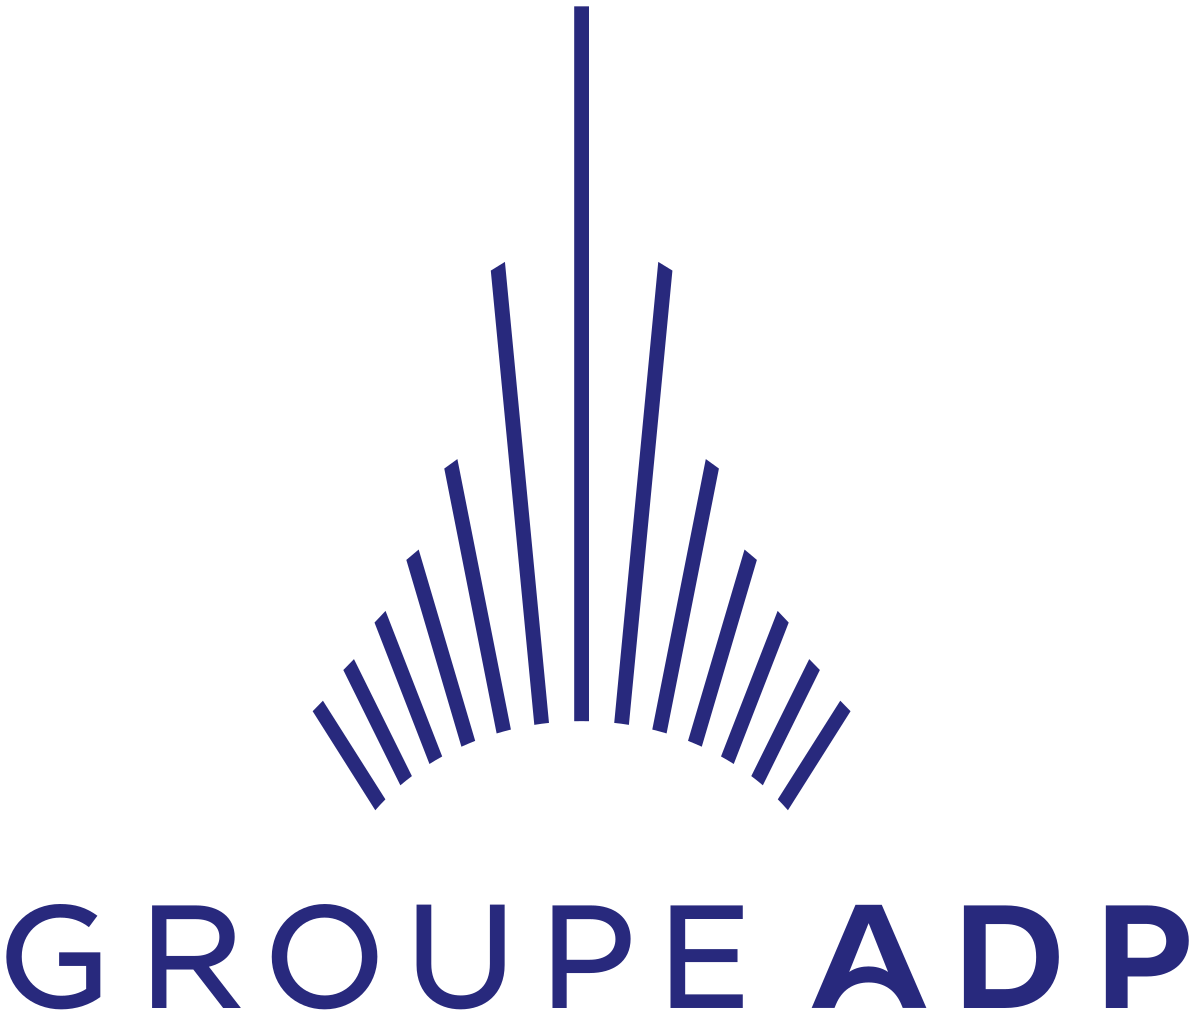 Olympics-Paris airports company Groupe ADP becomes Paris 2024 official partner